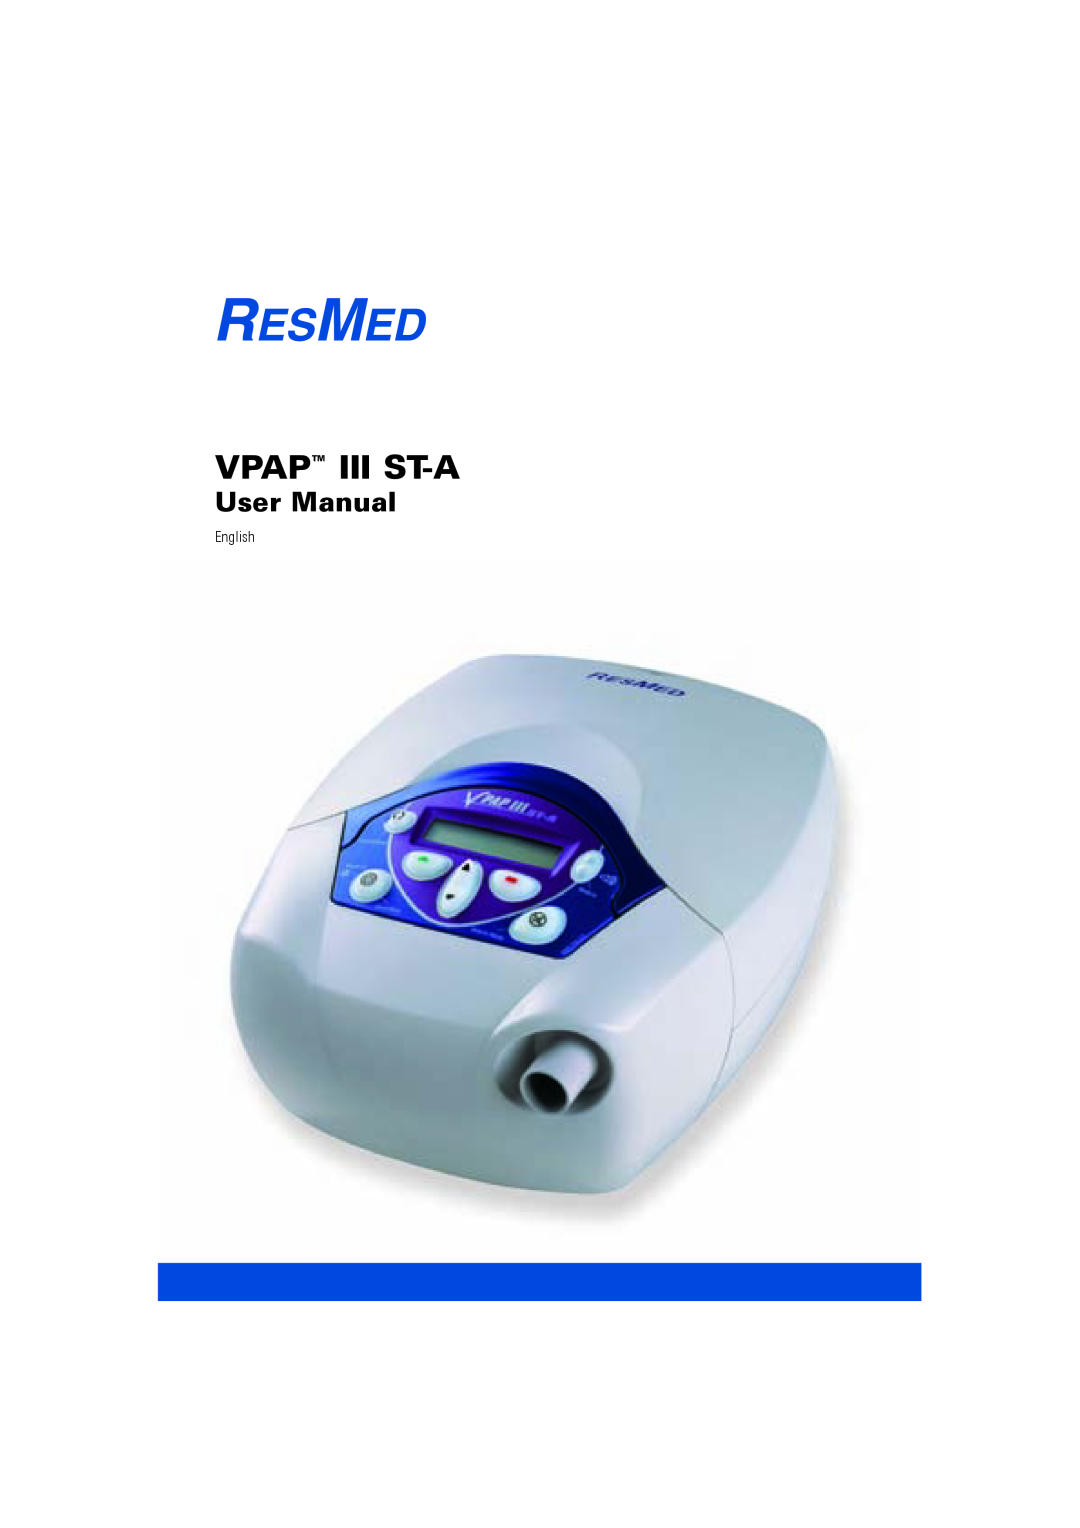 ResMed III ST-A user manual Vpap Iii St-A 